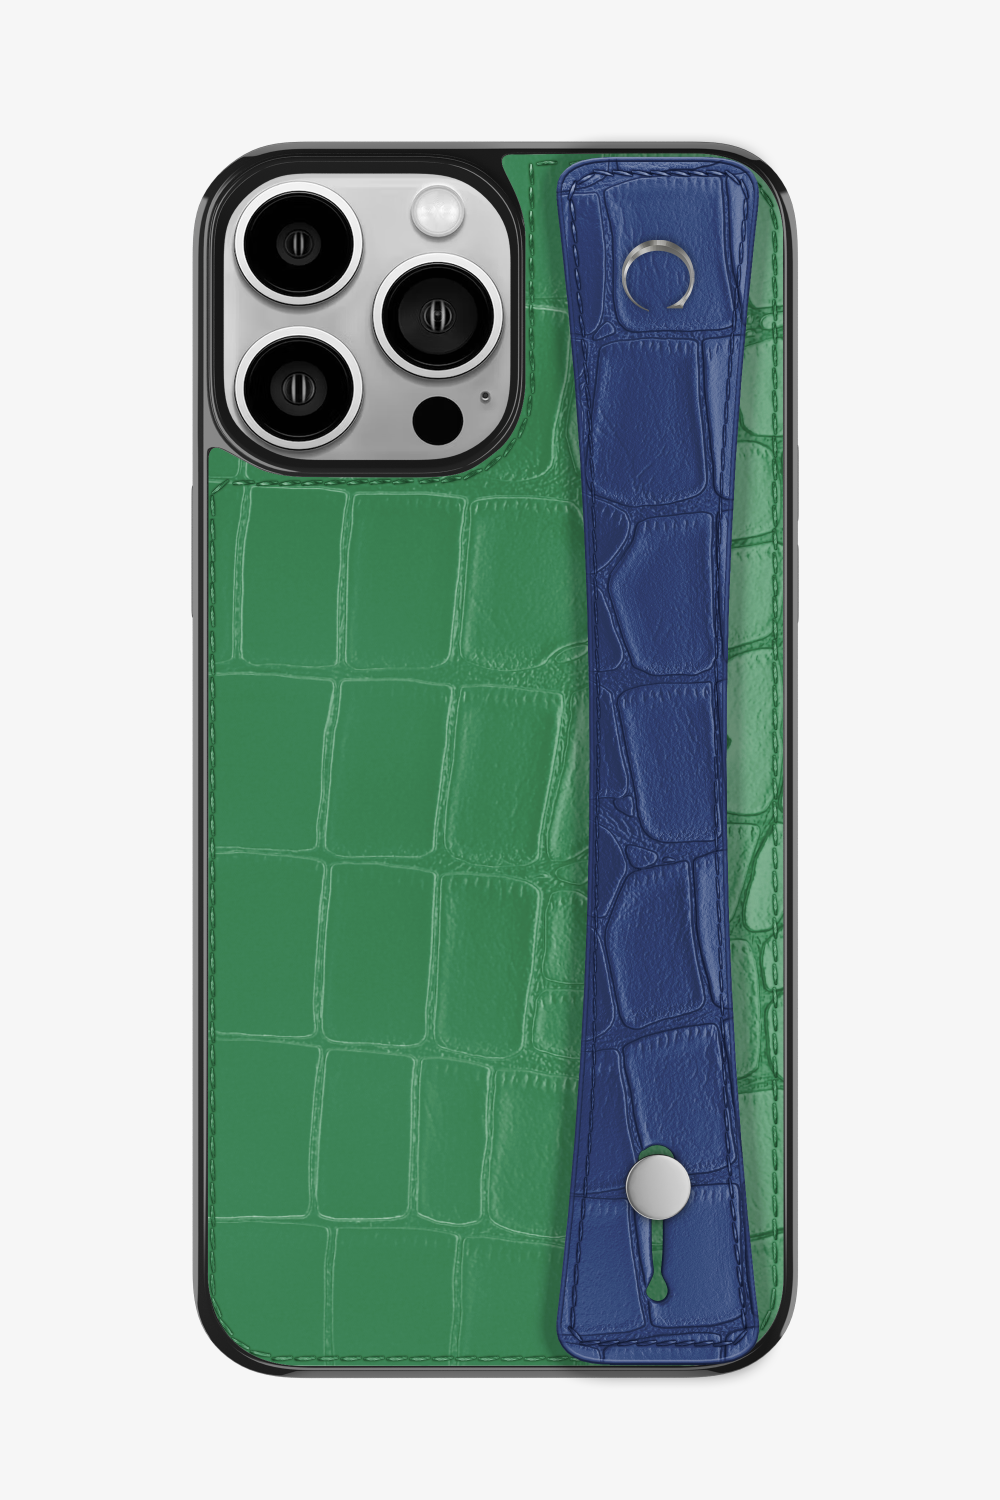 Alligator Sports Strap Case for iPhone 15 Pro Max - Green Emerald / Navy Blue - zollofrance